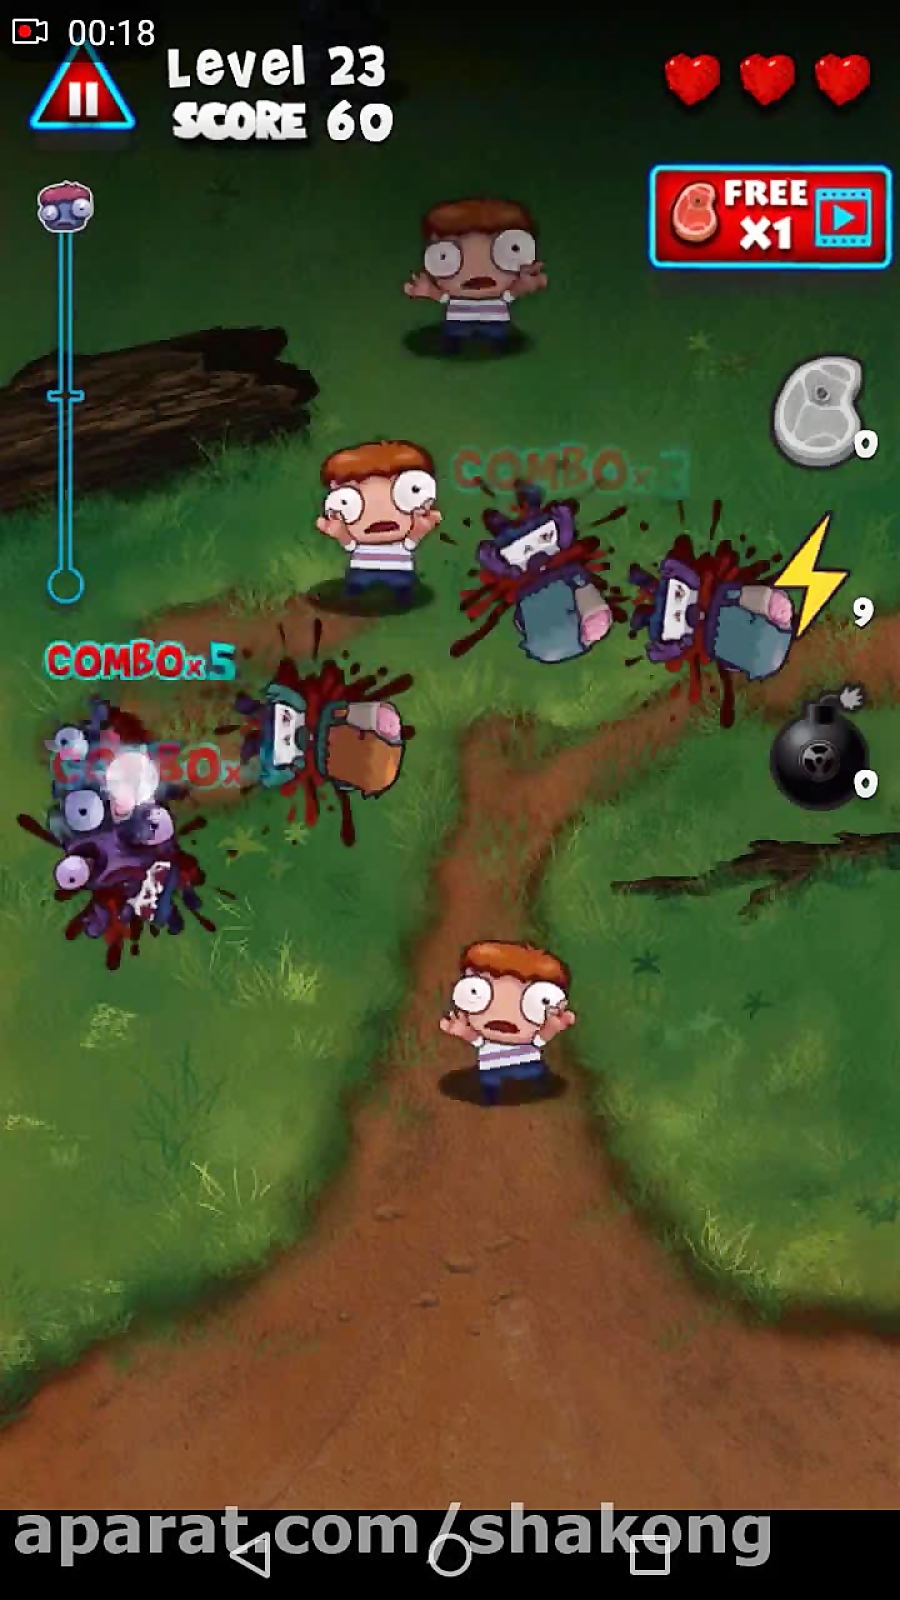 Zombie Smasher | Mobile Game